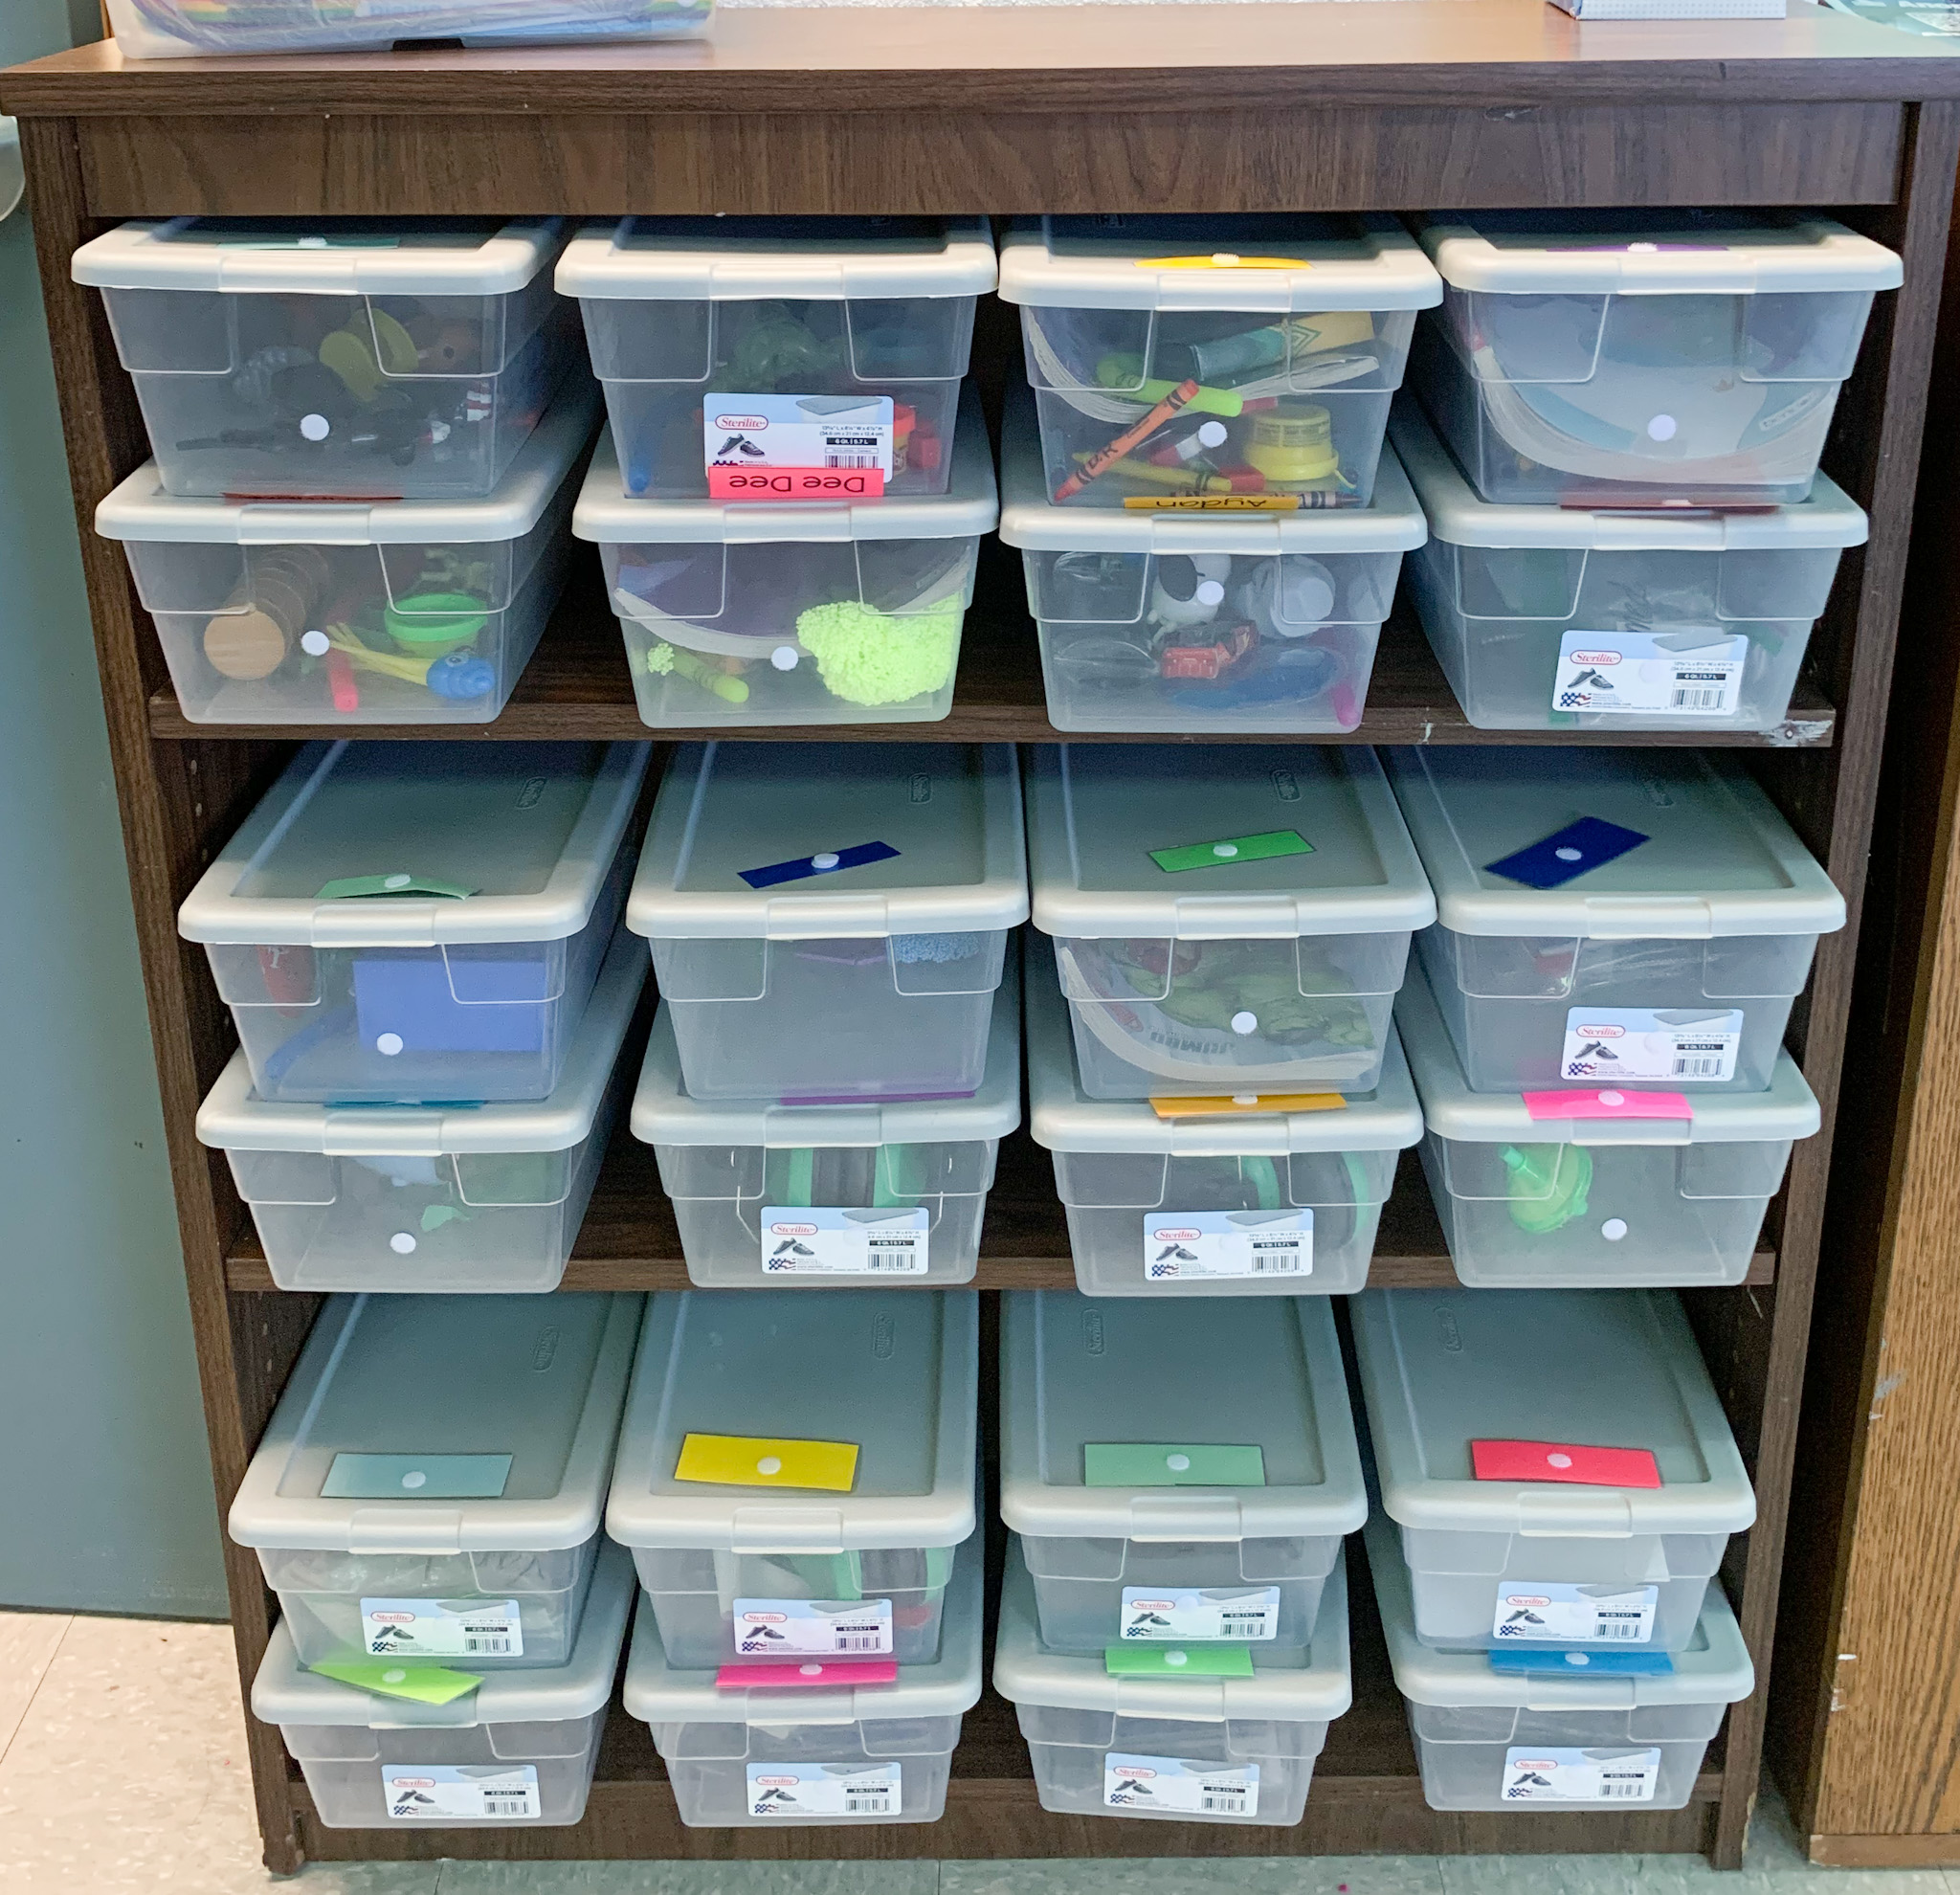 Here is a picture of my individual IEP and Reinforcement bins.